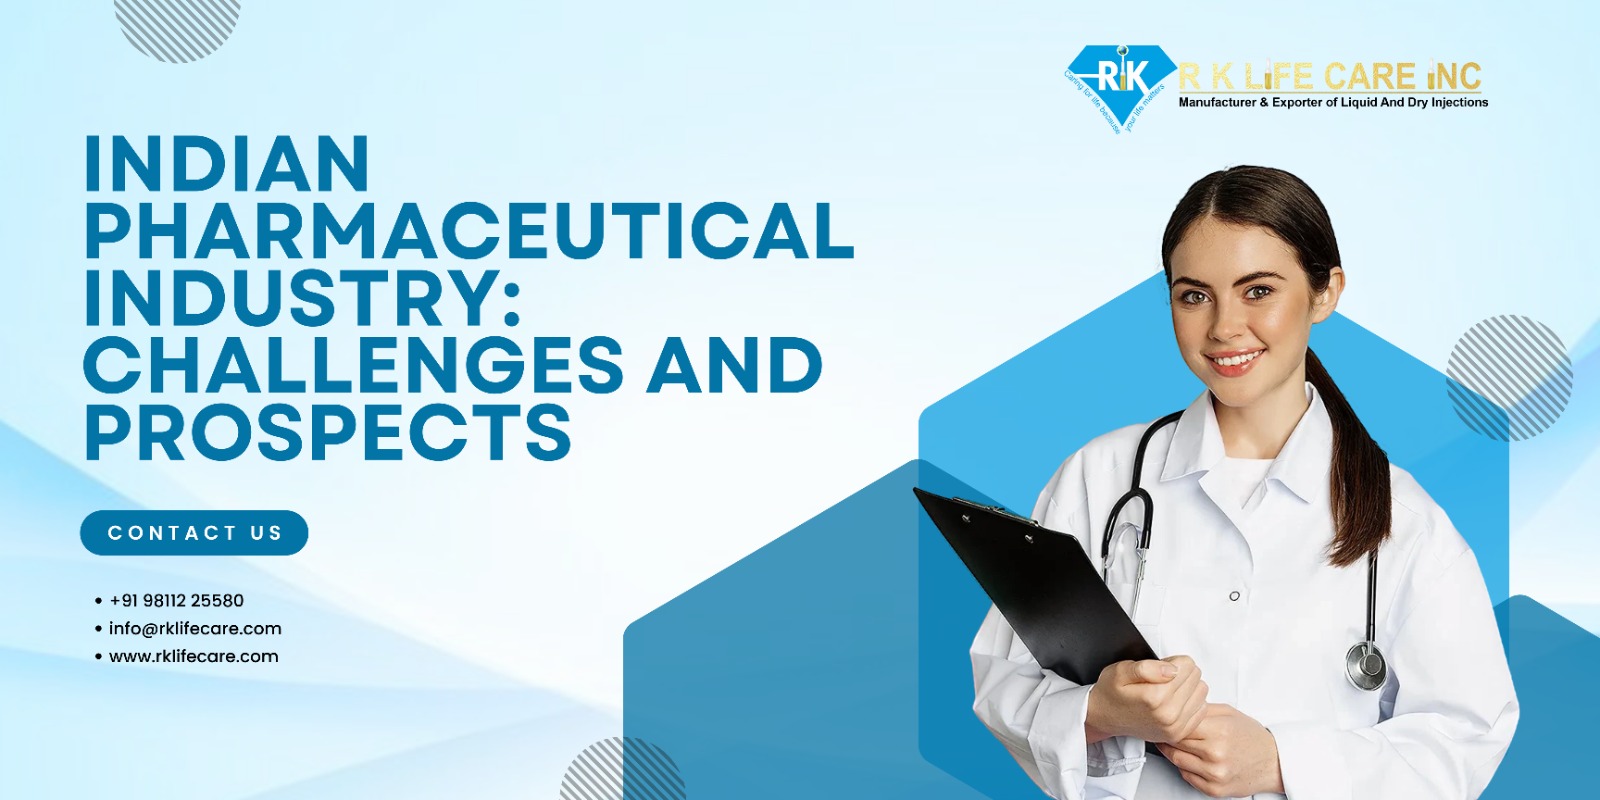 Indian Pharmaceutical Industry: Challenges and Prospects